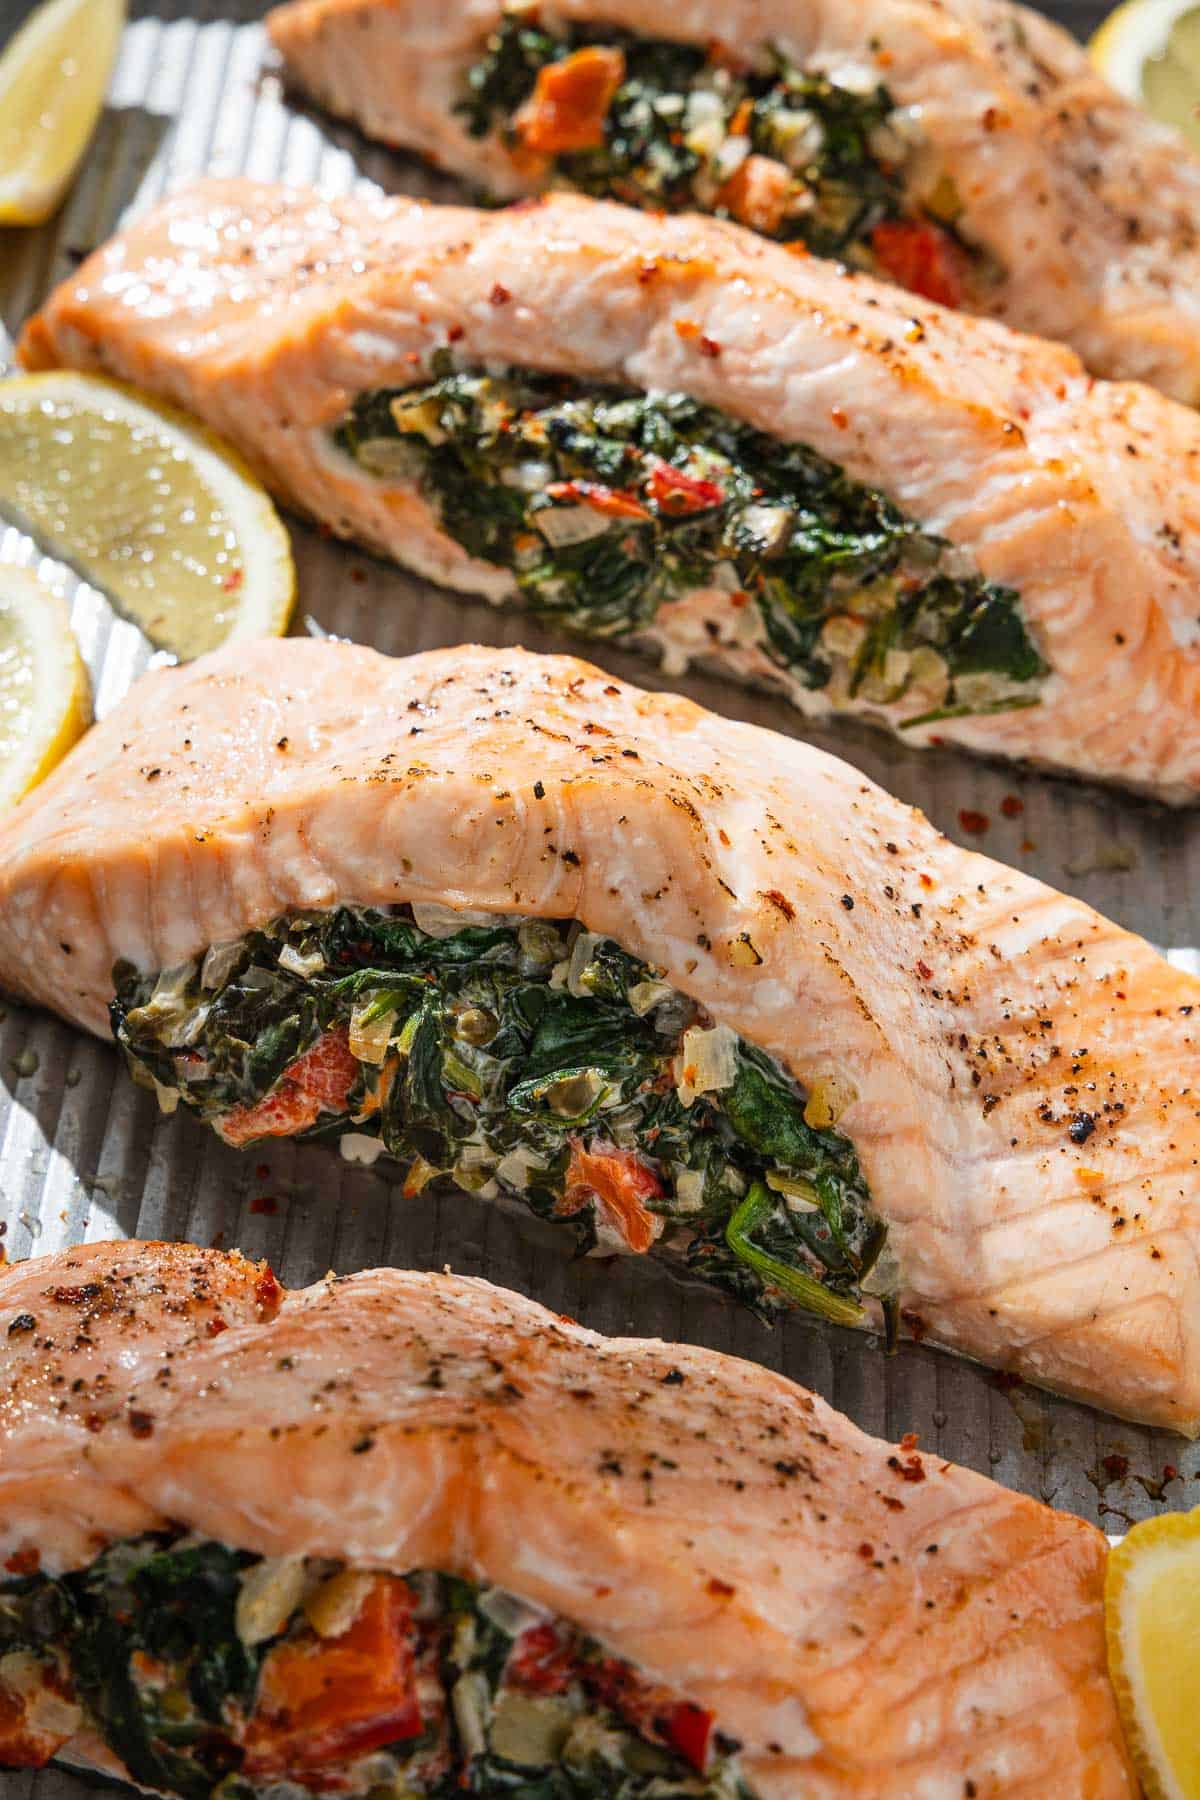 Stuffed Salmon with Spinach, Capers, and Greek Yogurt